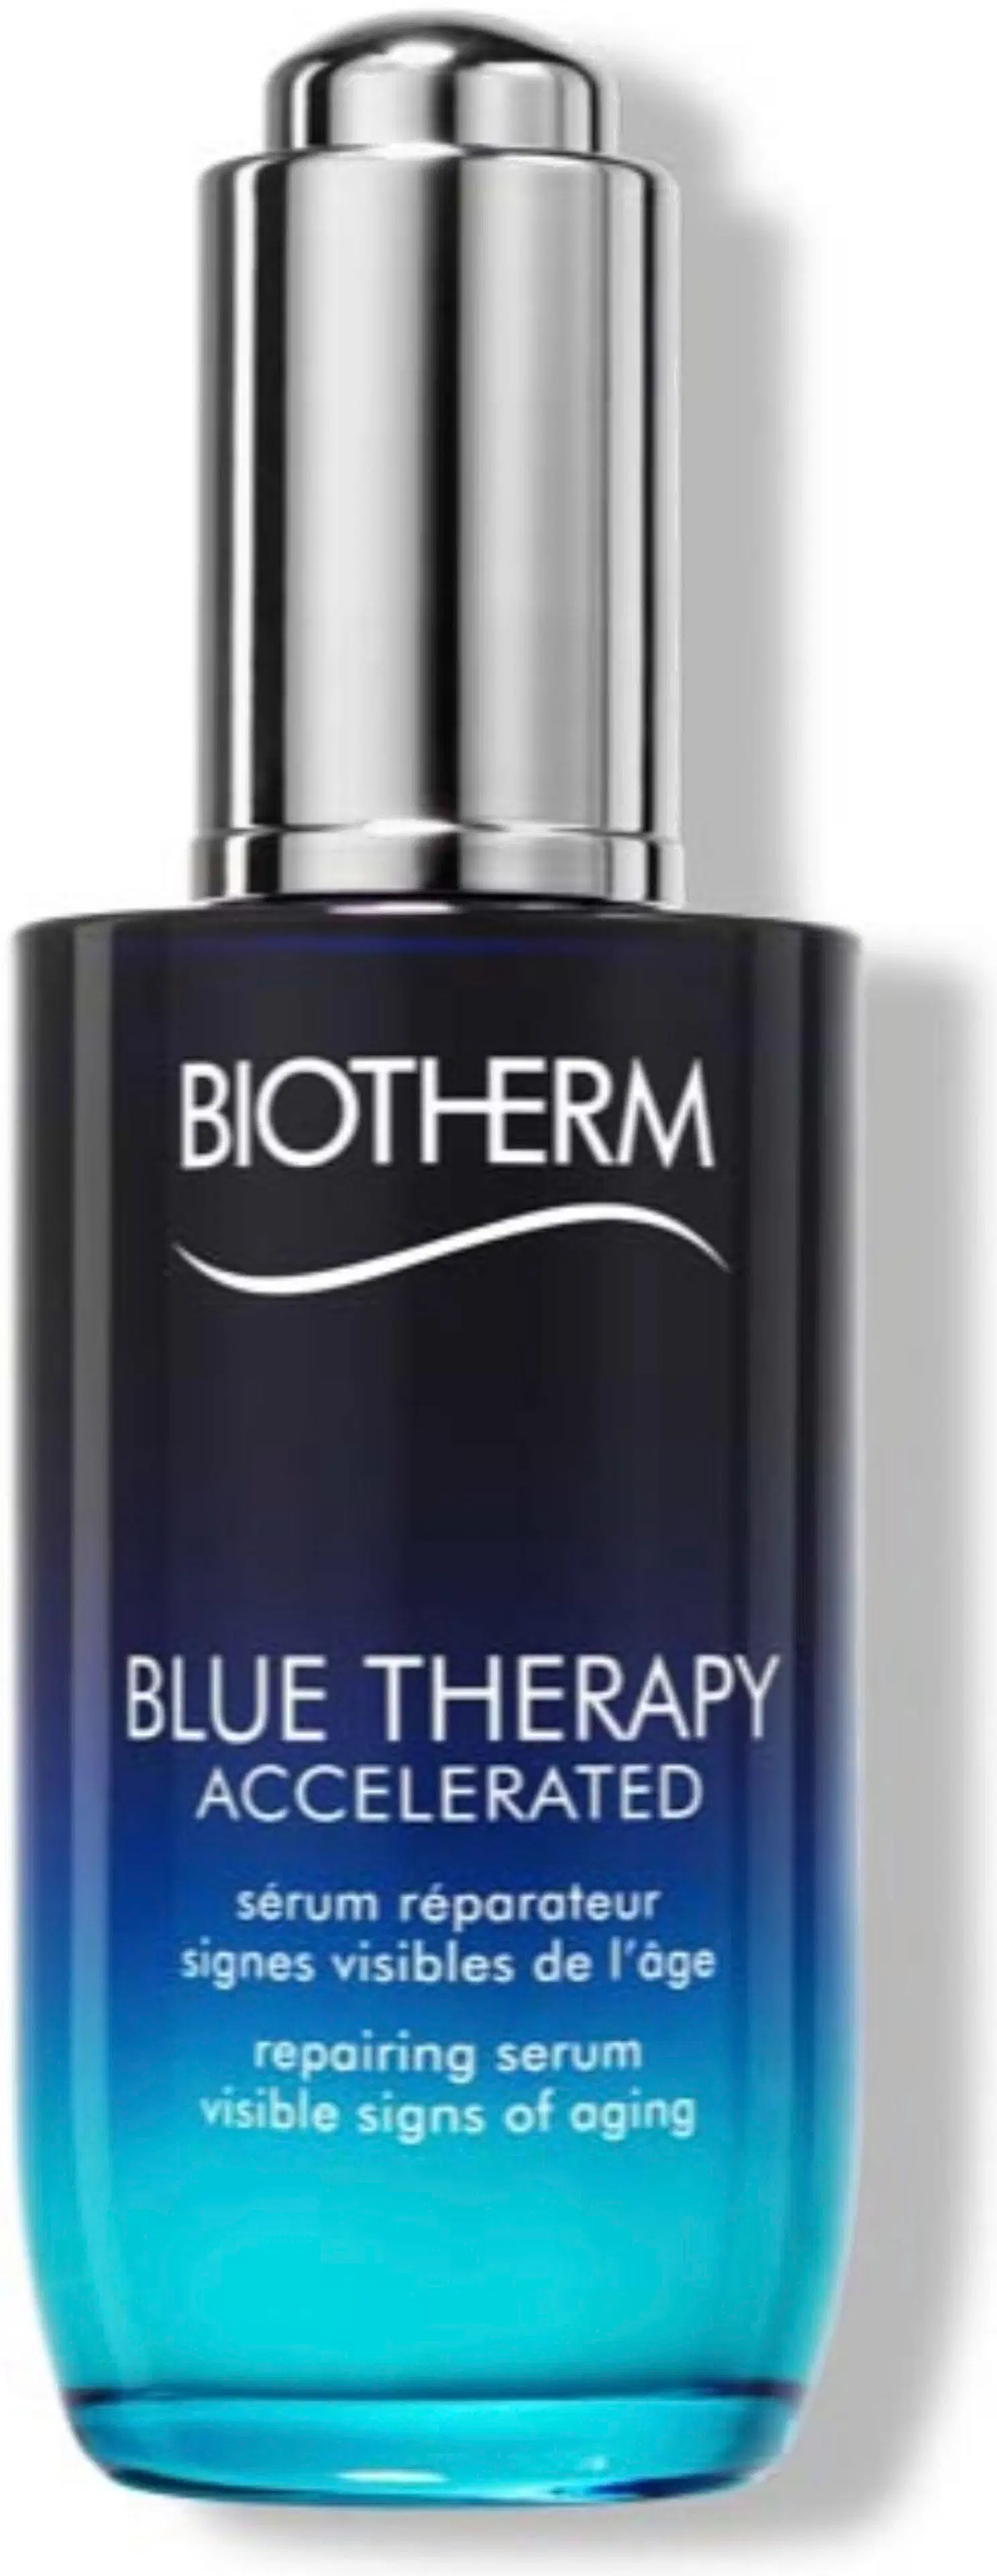 Biotherm Blue Therapy Accelerated seerumi 50 ml